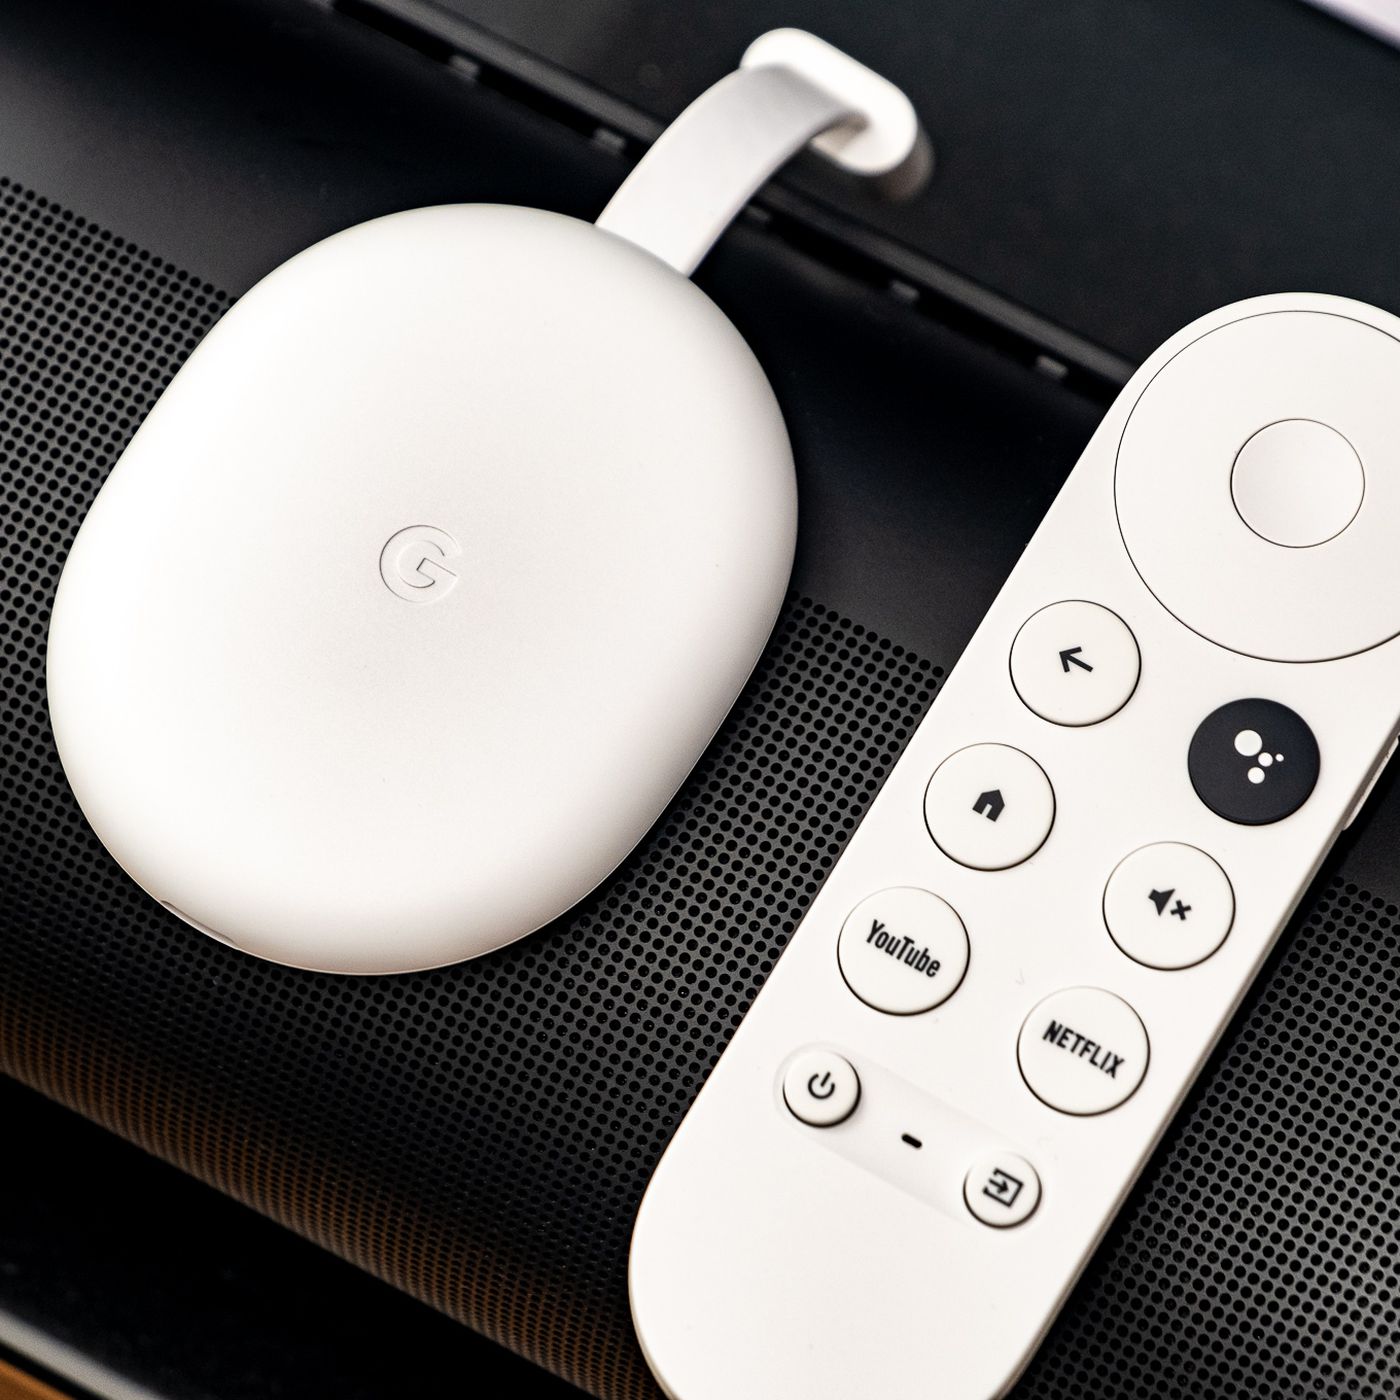 Mom Also To construct Looks like Google's cheaper Chromecast is becoming a reality - The Verge